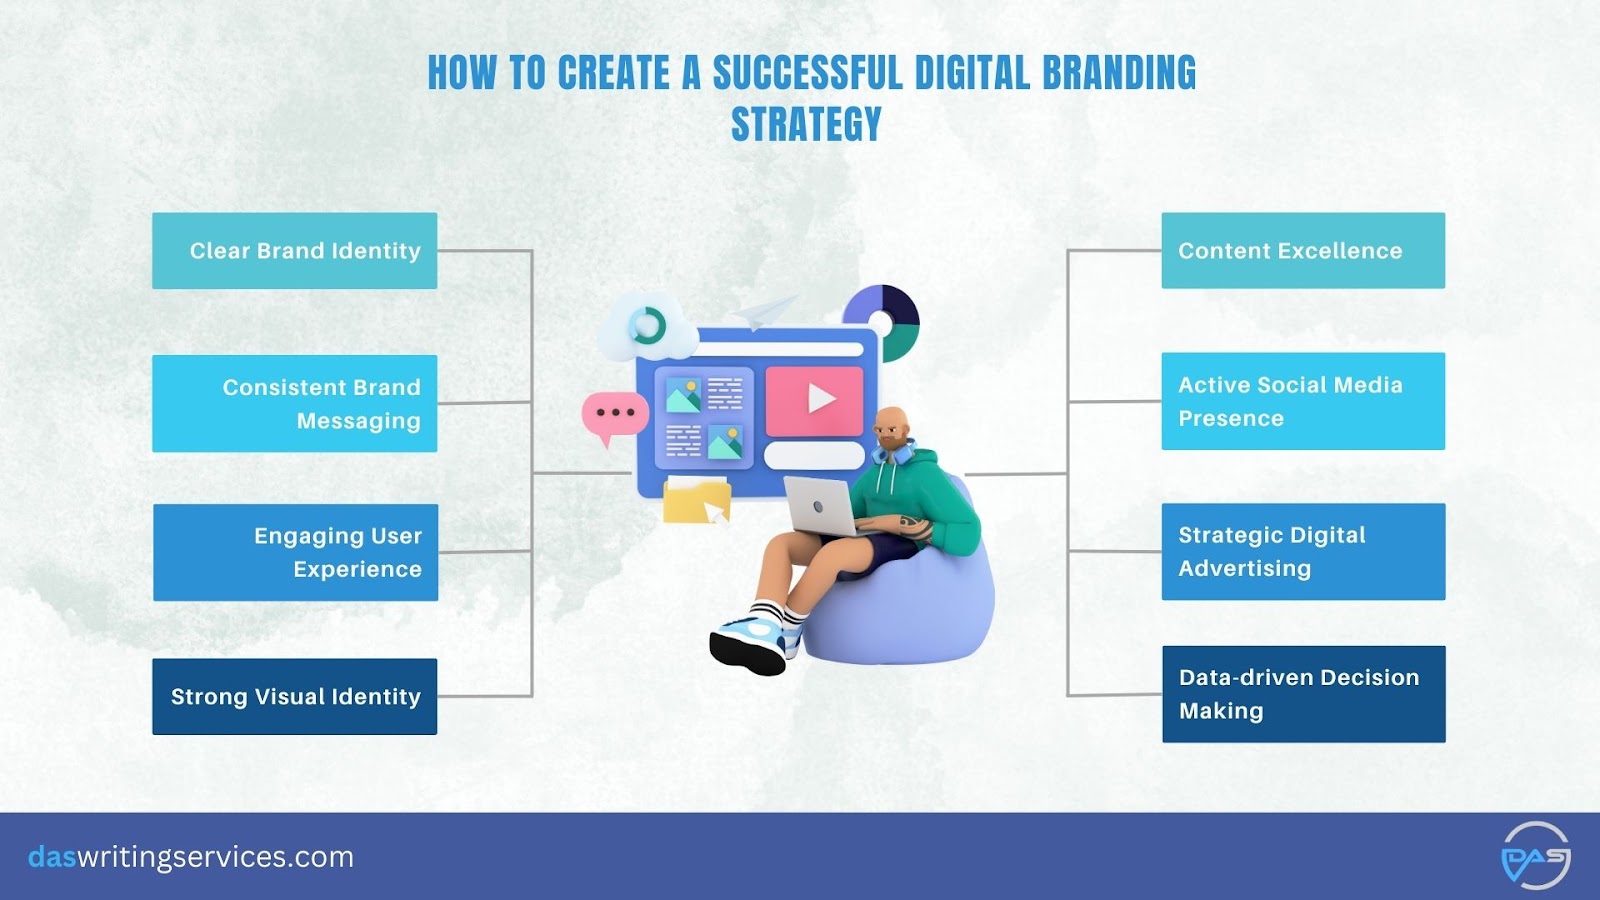 How to create a successful digital branding strategy